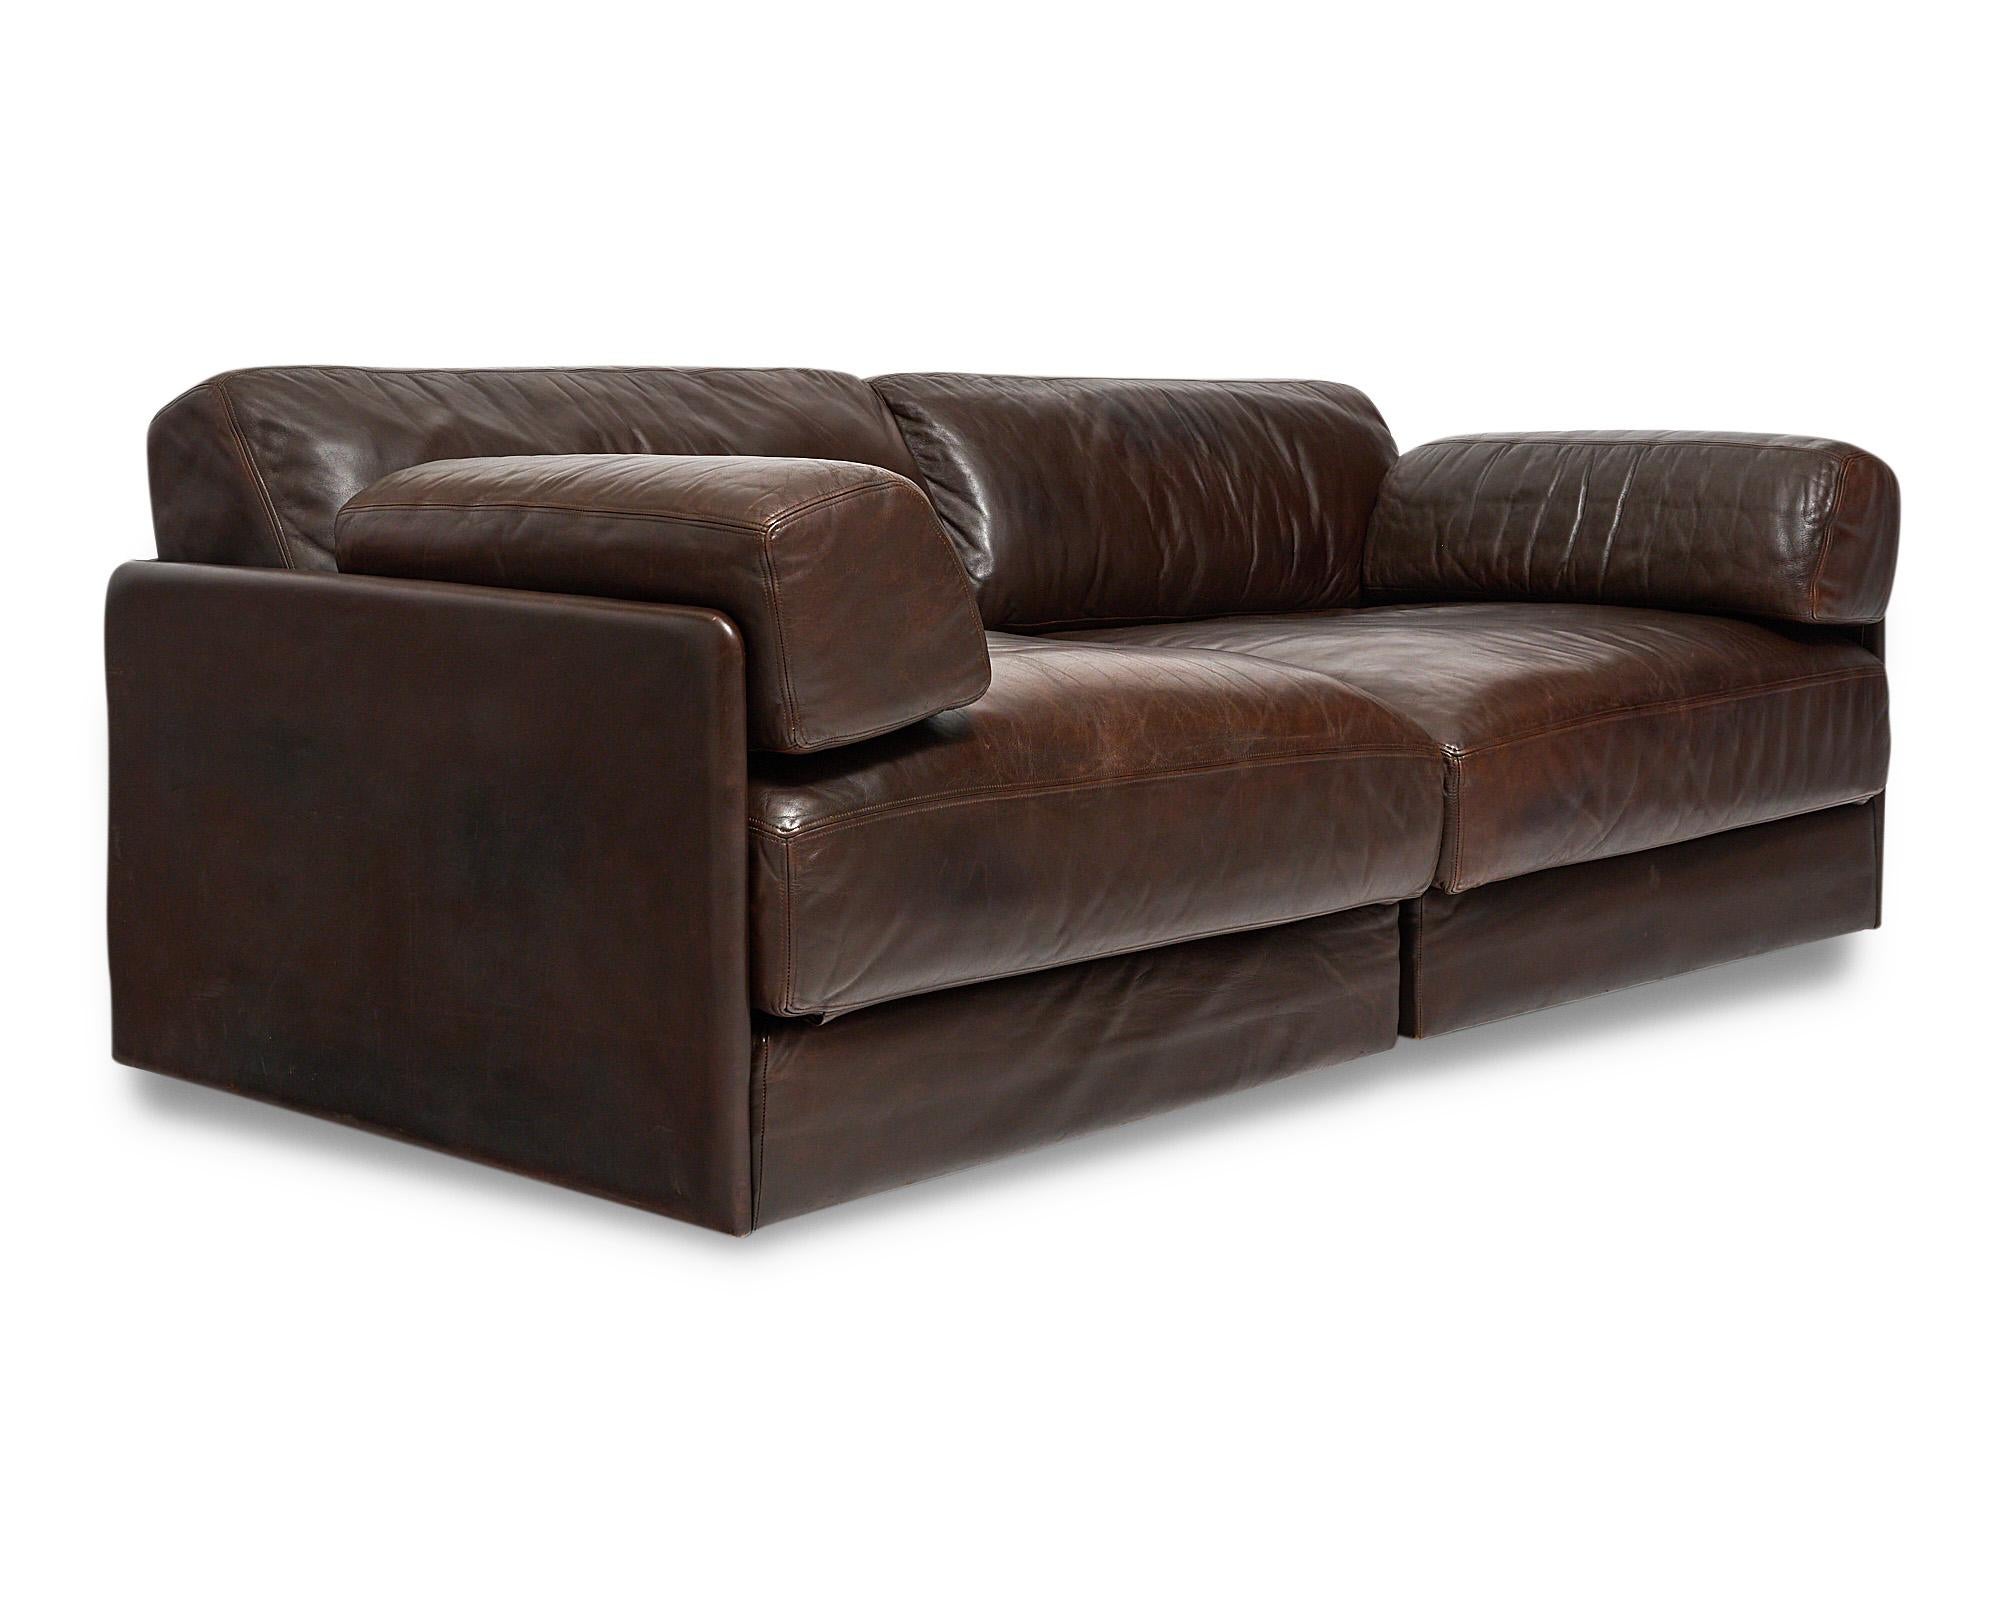 Sofa, from Switzerland, DeSede exclusive, Model DS 76, upholstered in thick brown leather hide. The sofa consists of two modules with sofa bed function. Normal signs of wear and patina.